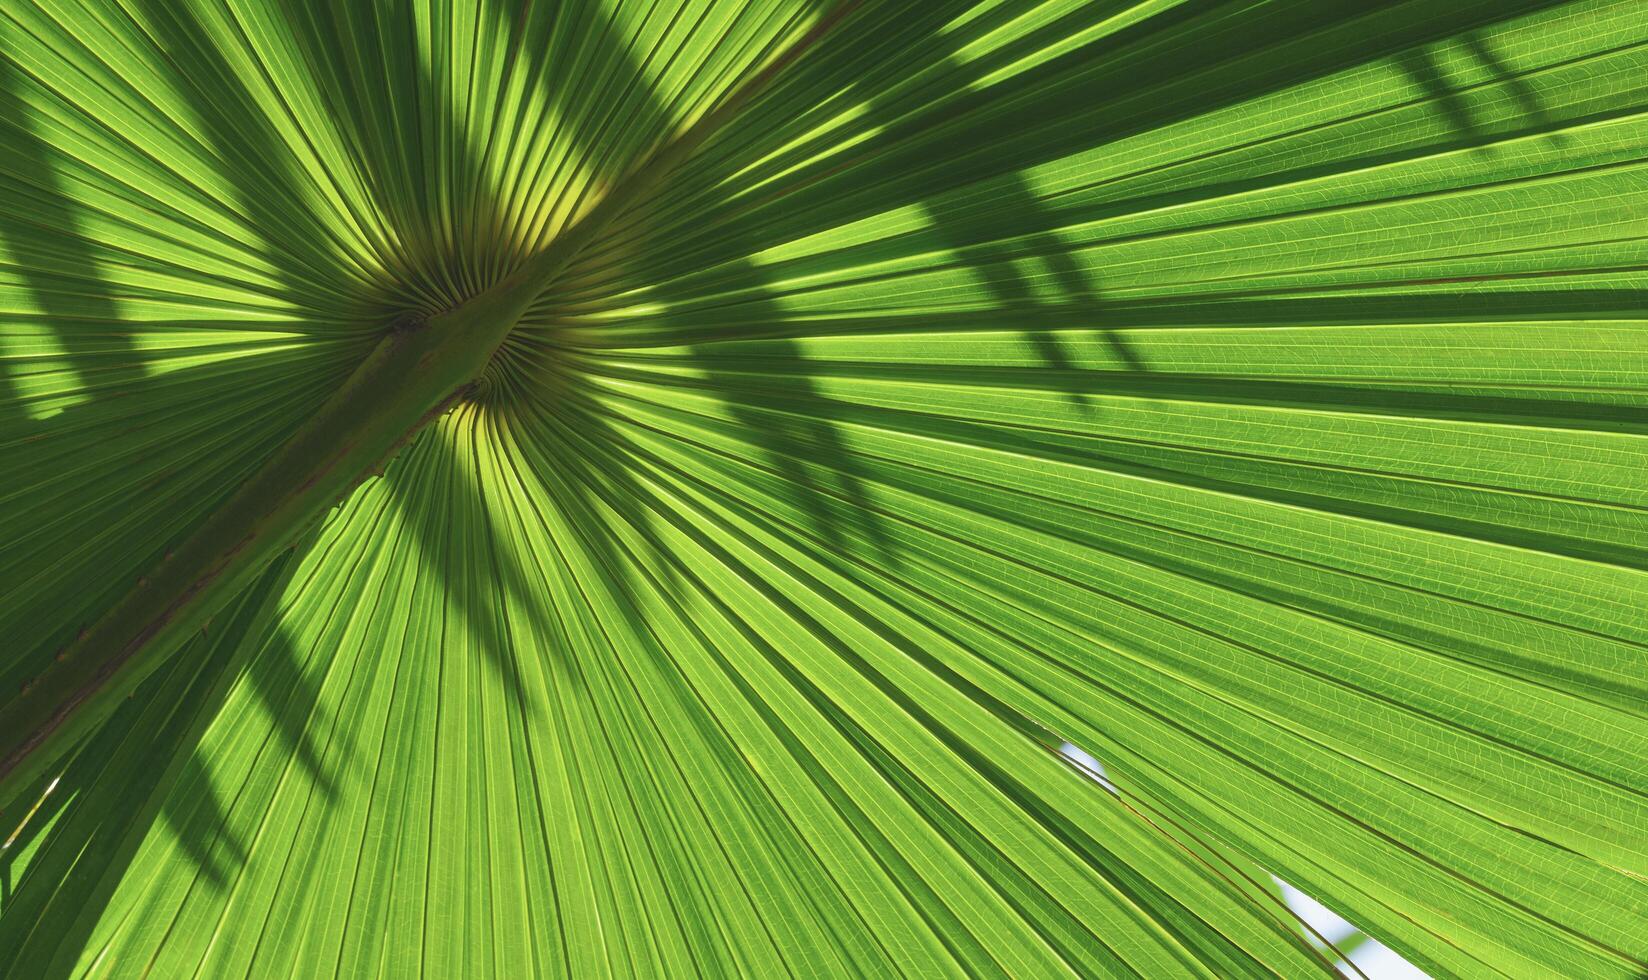 Background and texture of ventral side of green palm leaf with sunlight and shadow on dorsal side of leaf surface, Natural foliage background photo